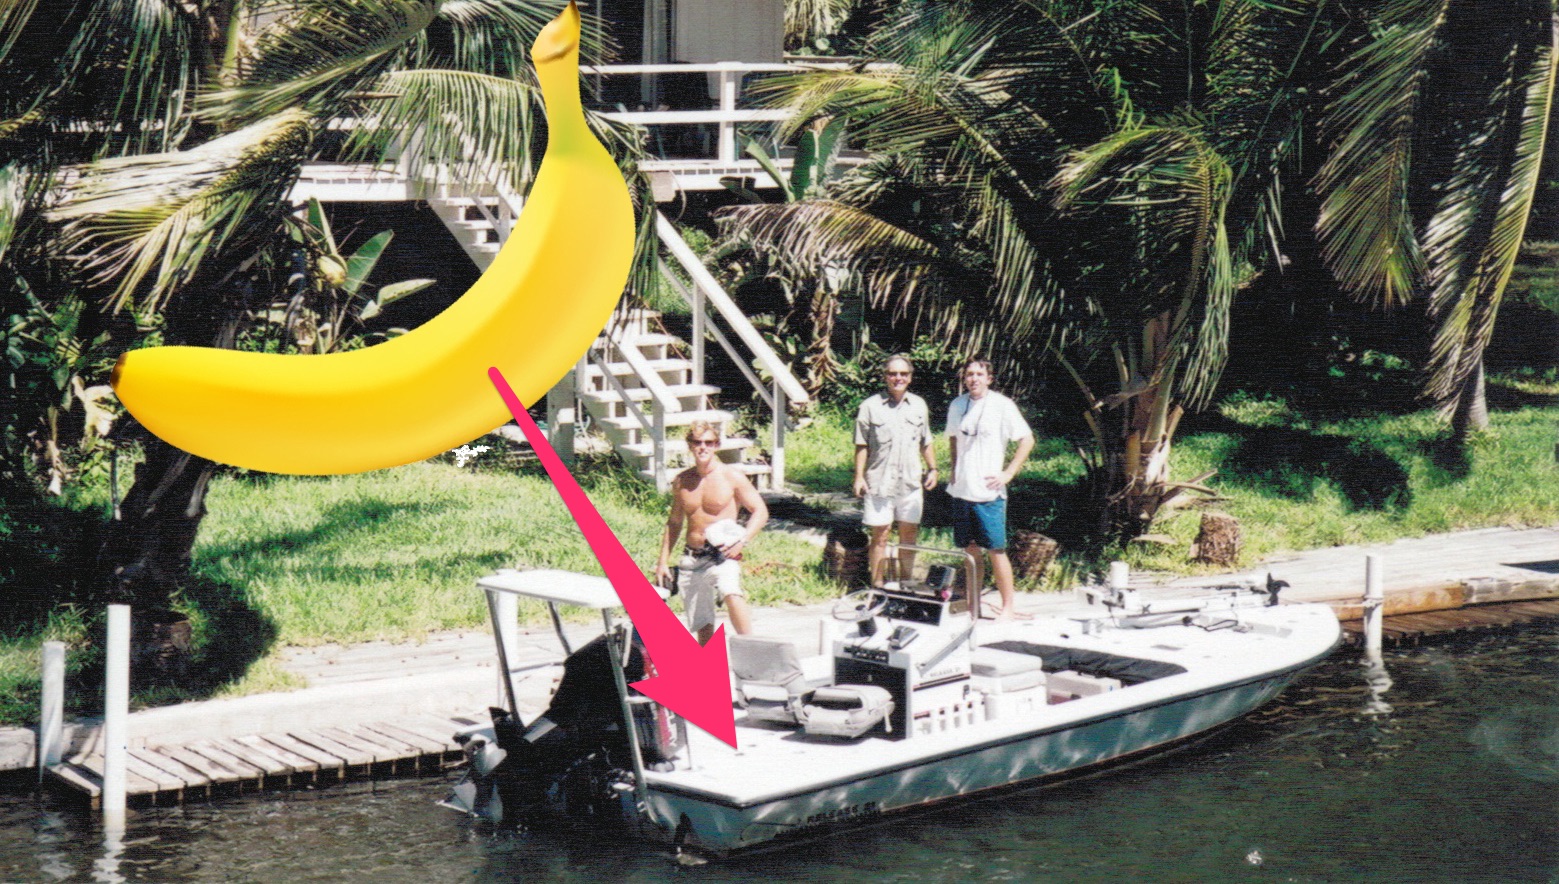 The Mystery of Bananas: Why are they bad luck on a fishing boat? The Role of Media in Perpetuating Superstition